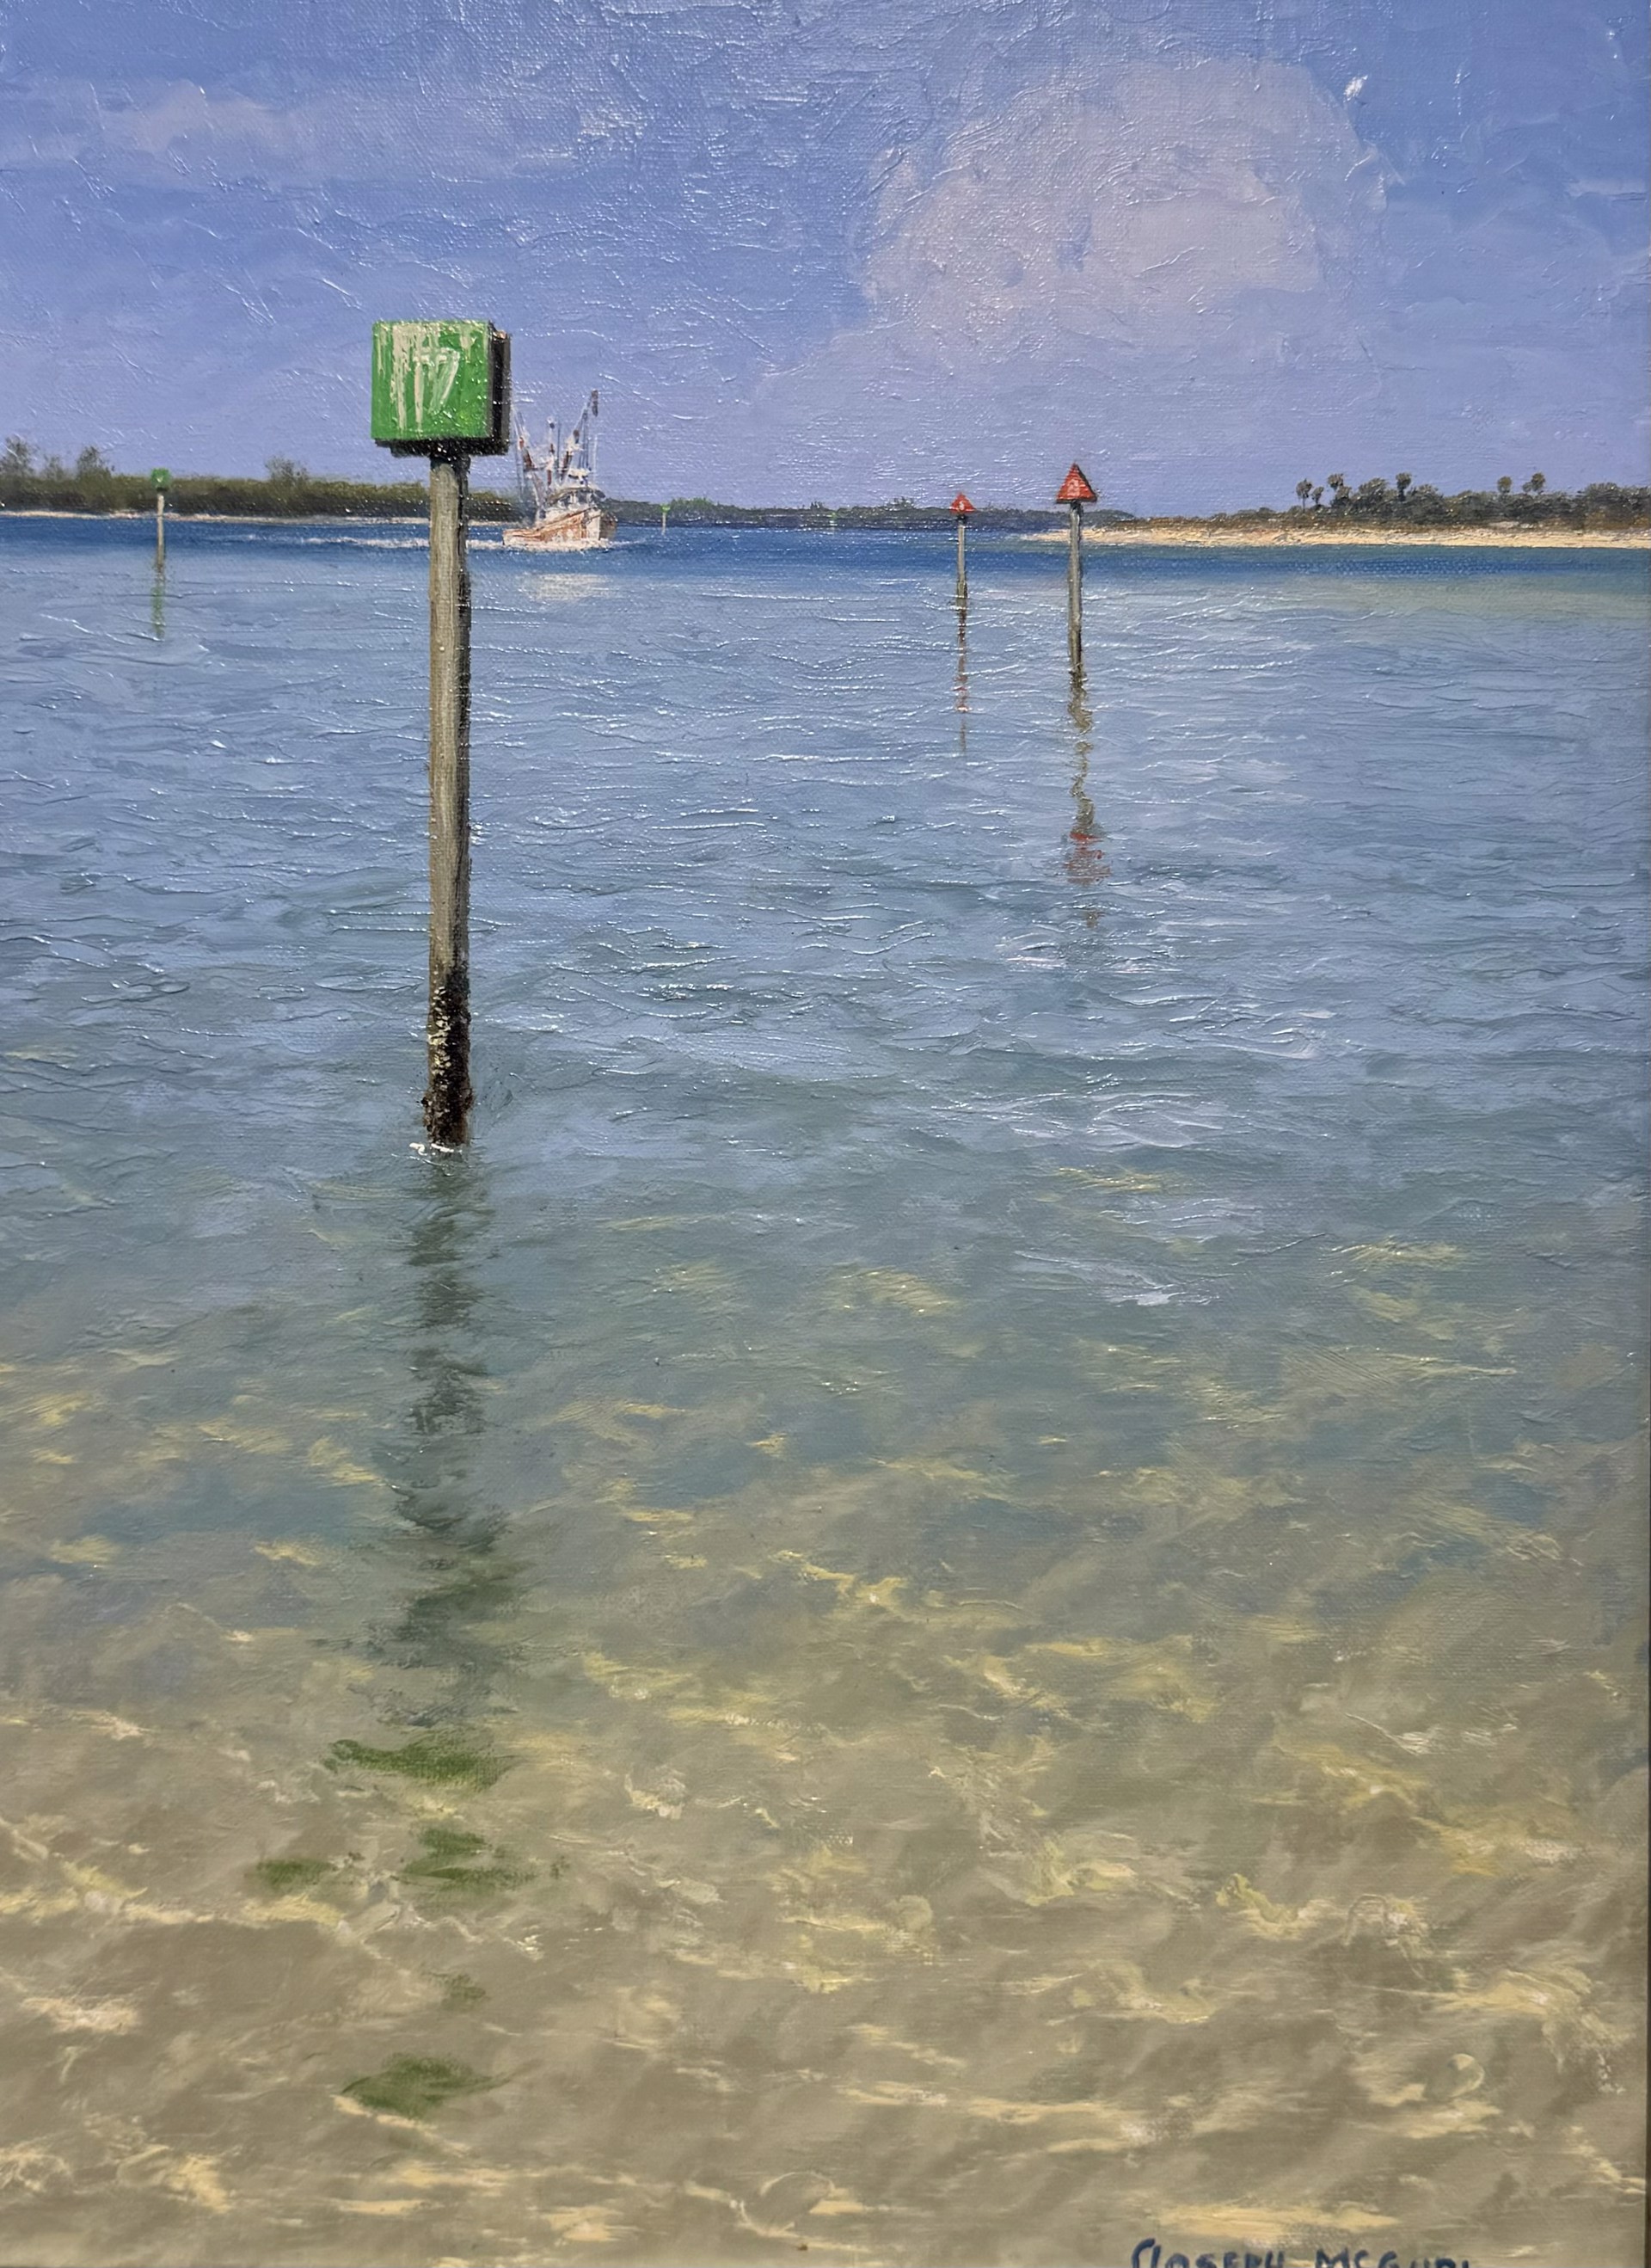 The Florida Waterways, Light on the Water by Joseph McGurl